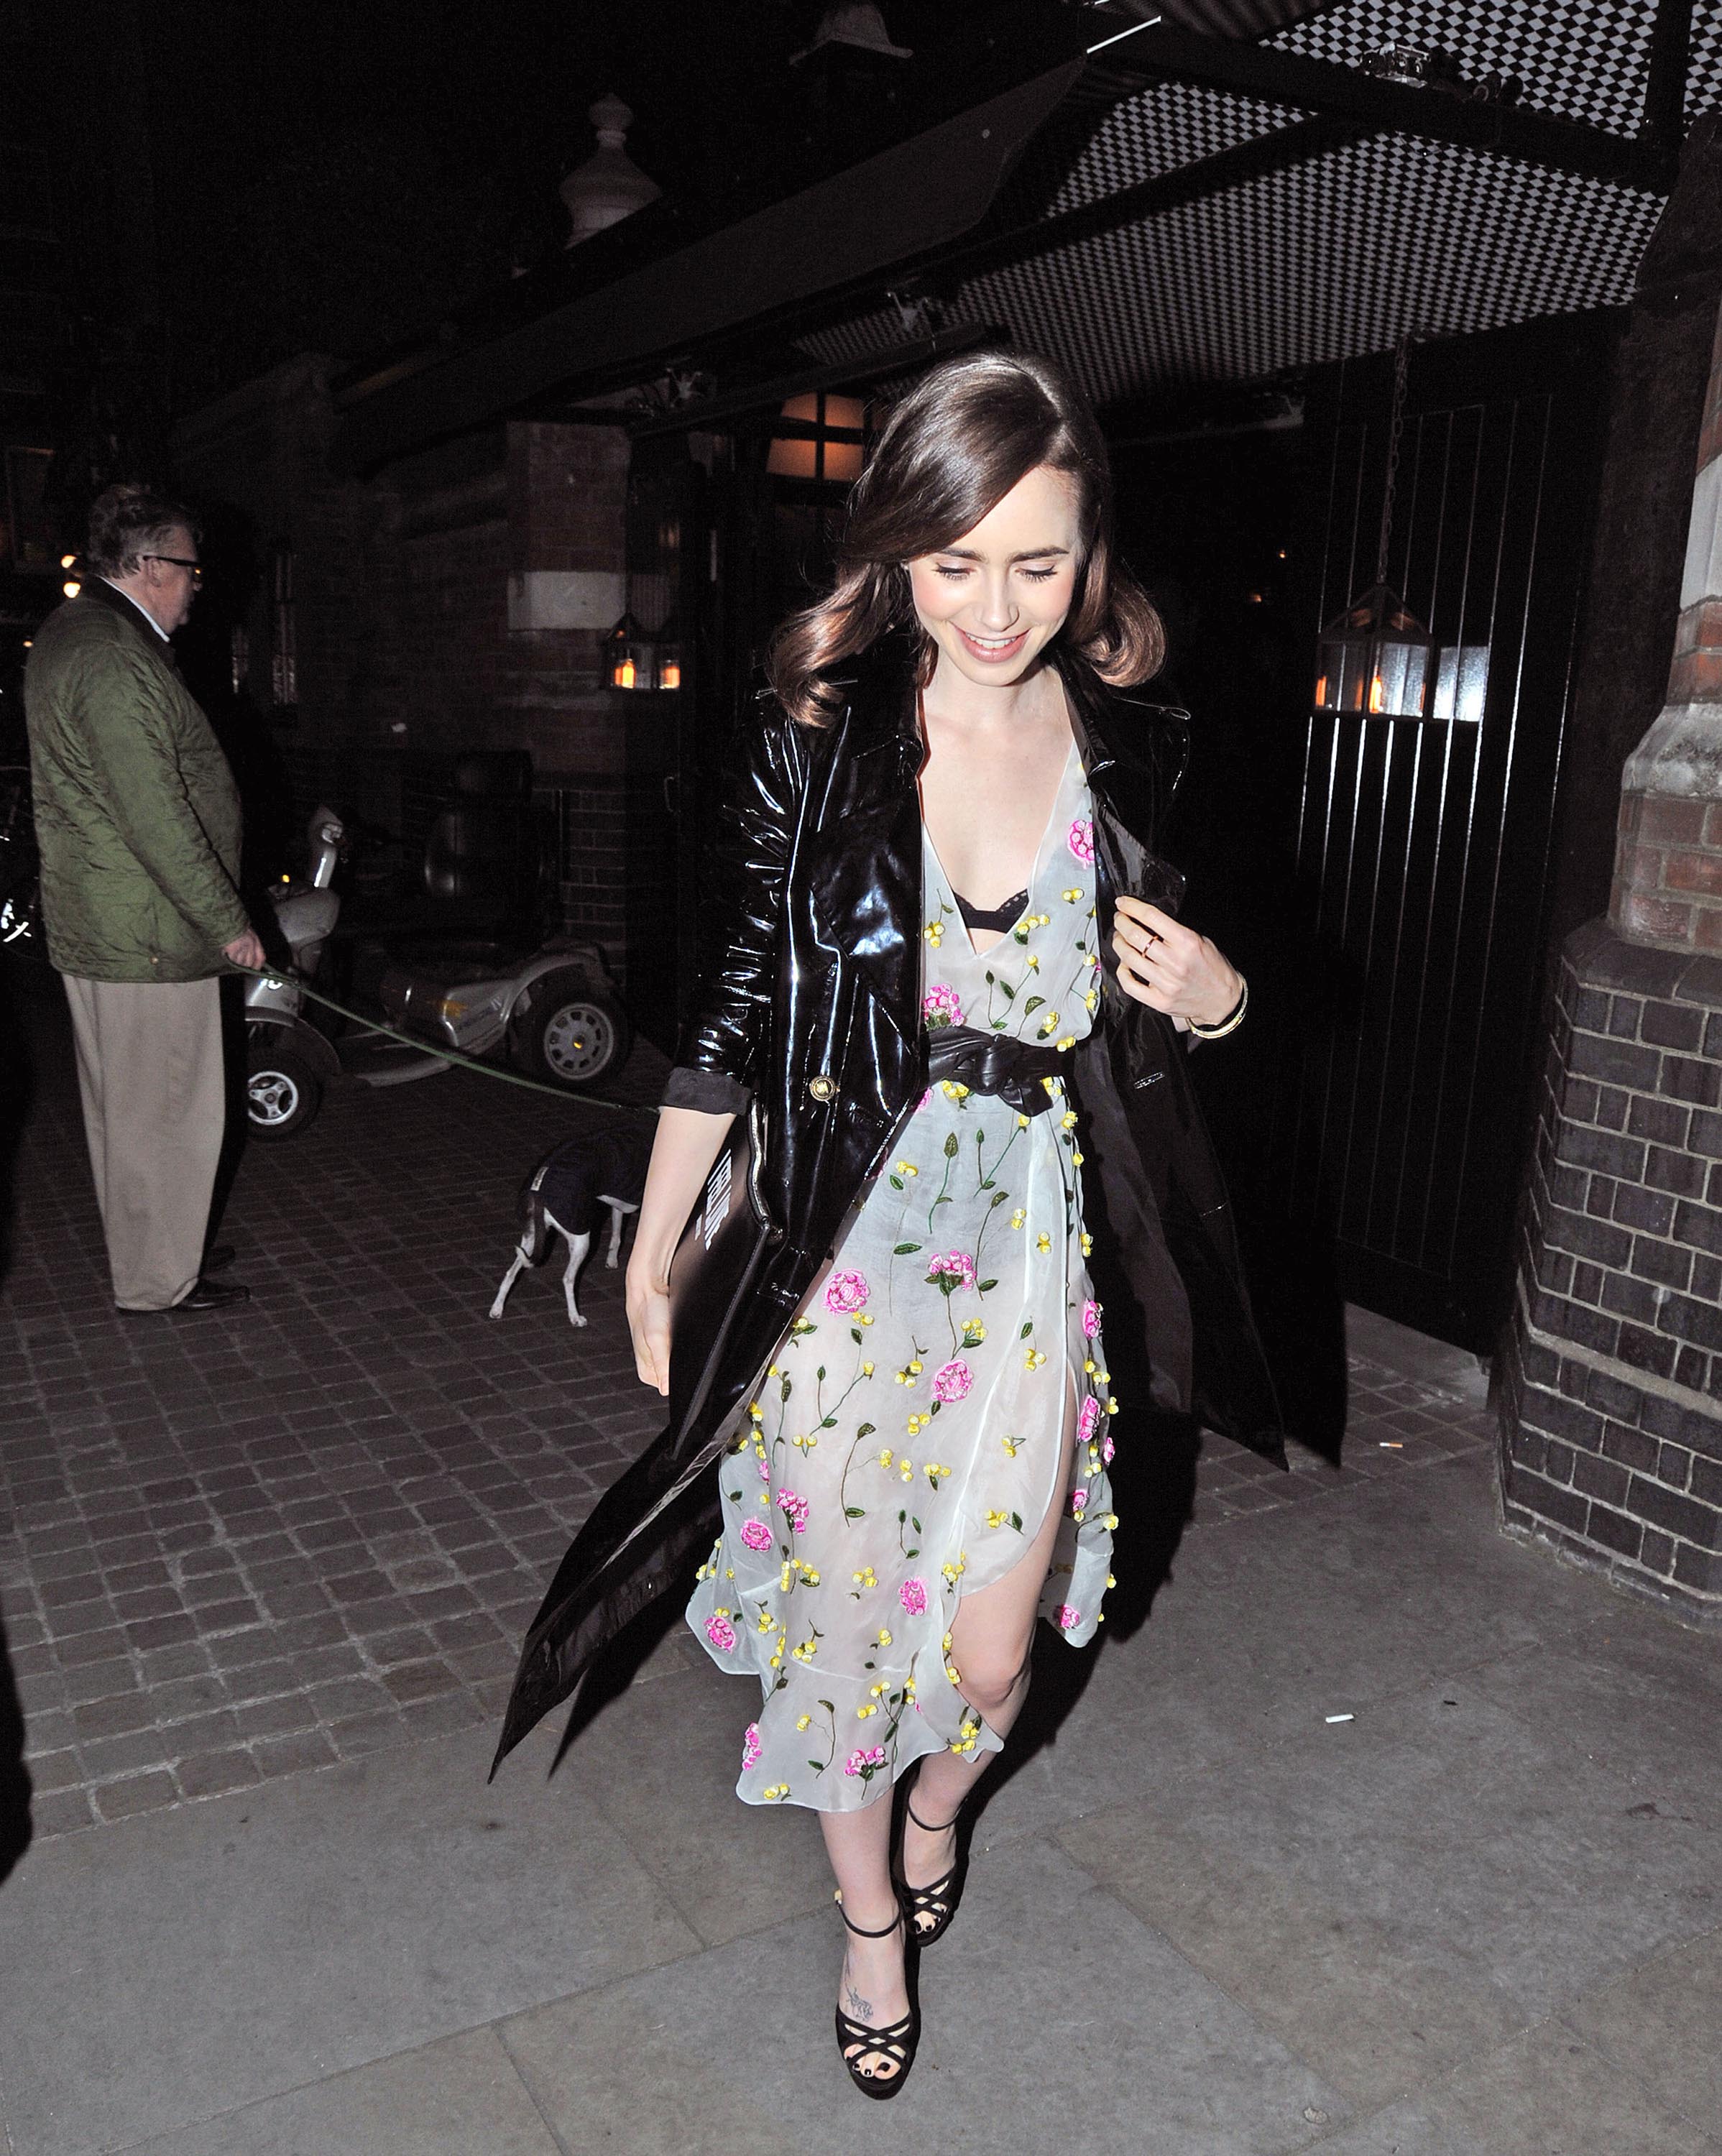 Lily Collins dined out at Chiltern Firehouse